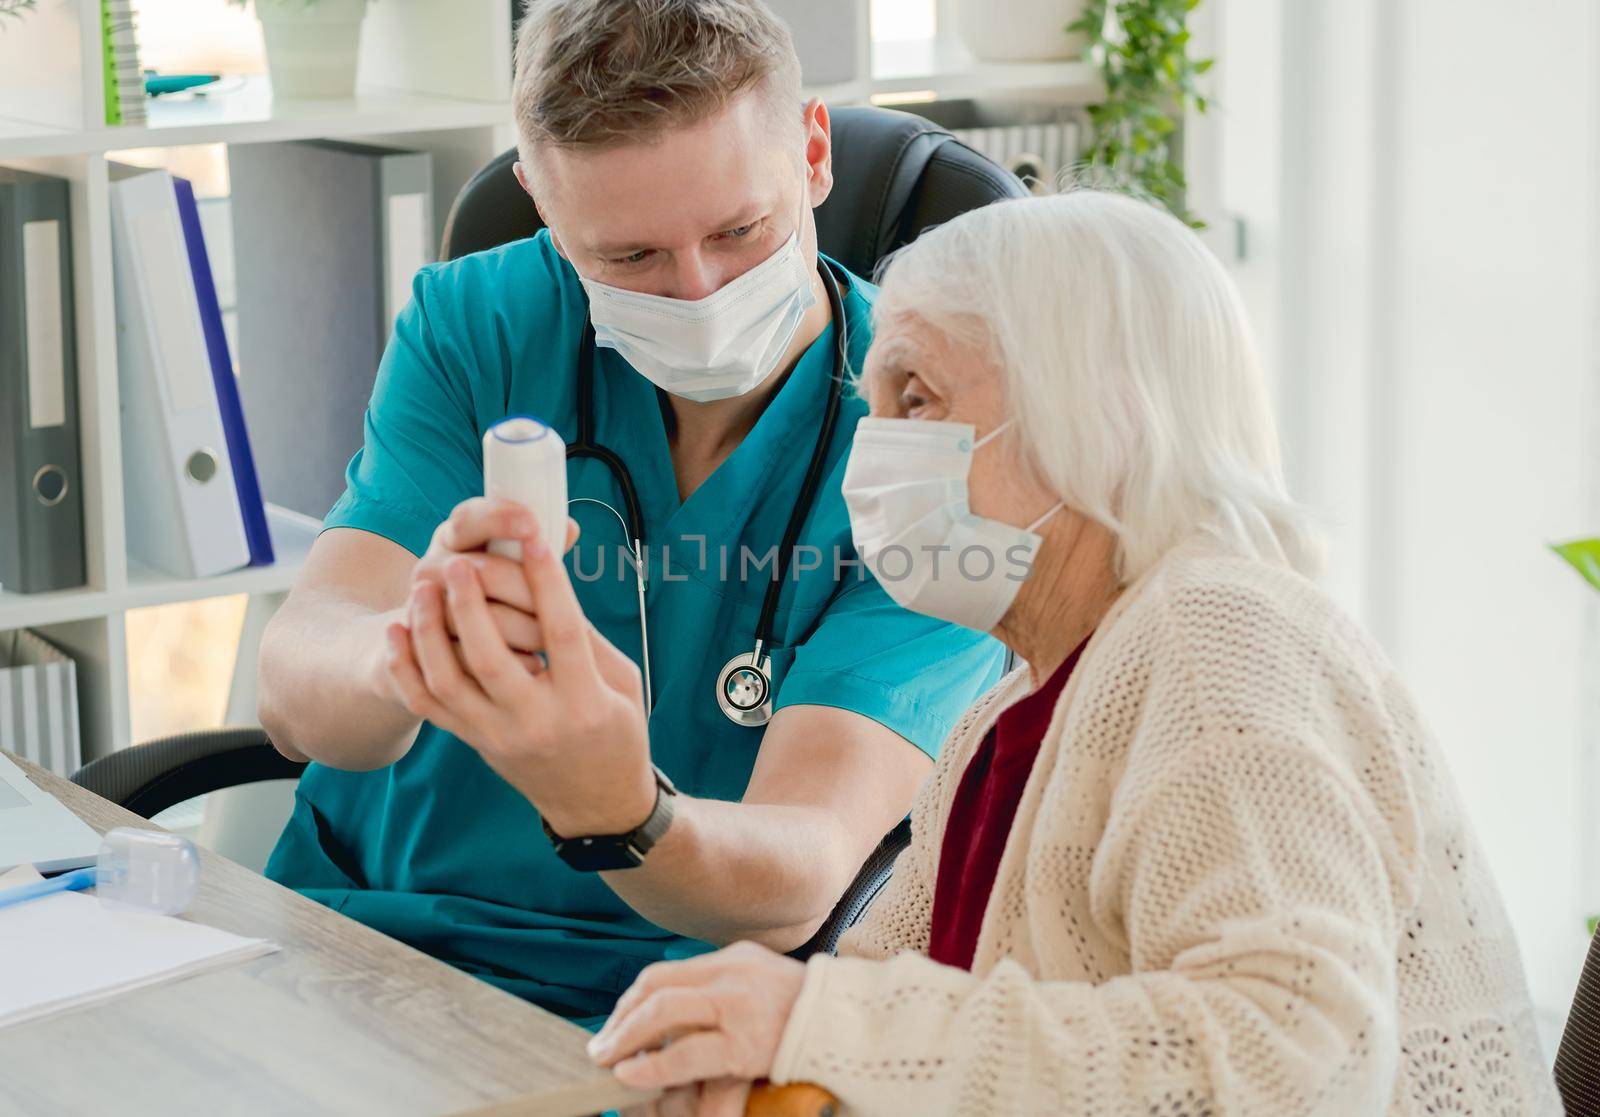 Therapist showing digital contactless thermometer to old woman at appointment during coronavirus pandemic